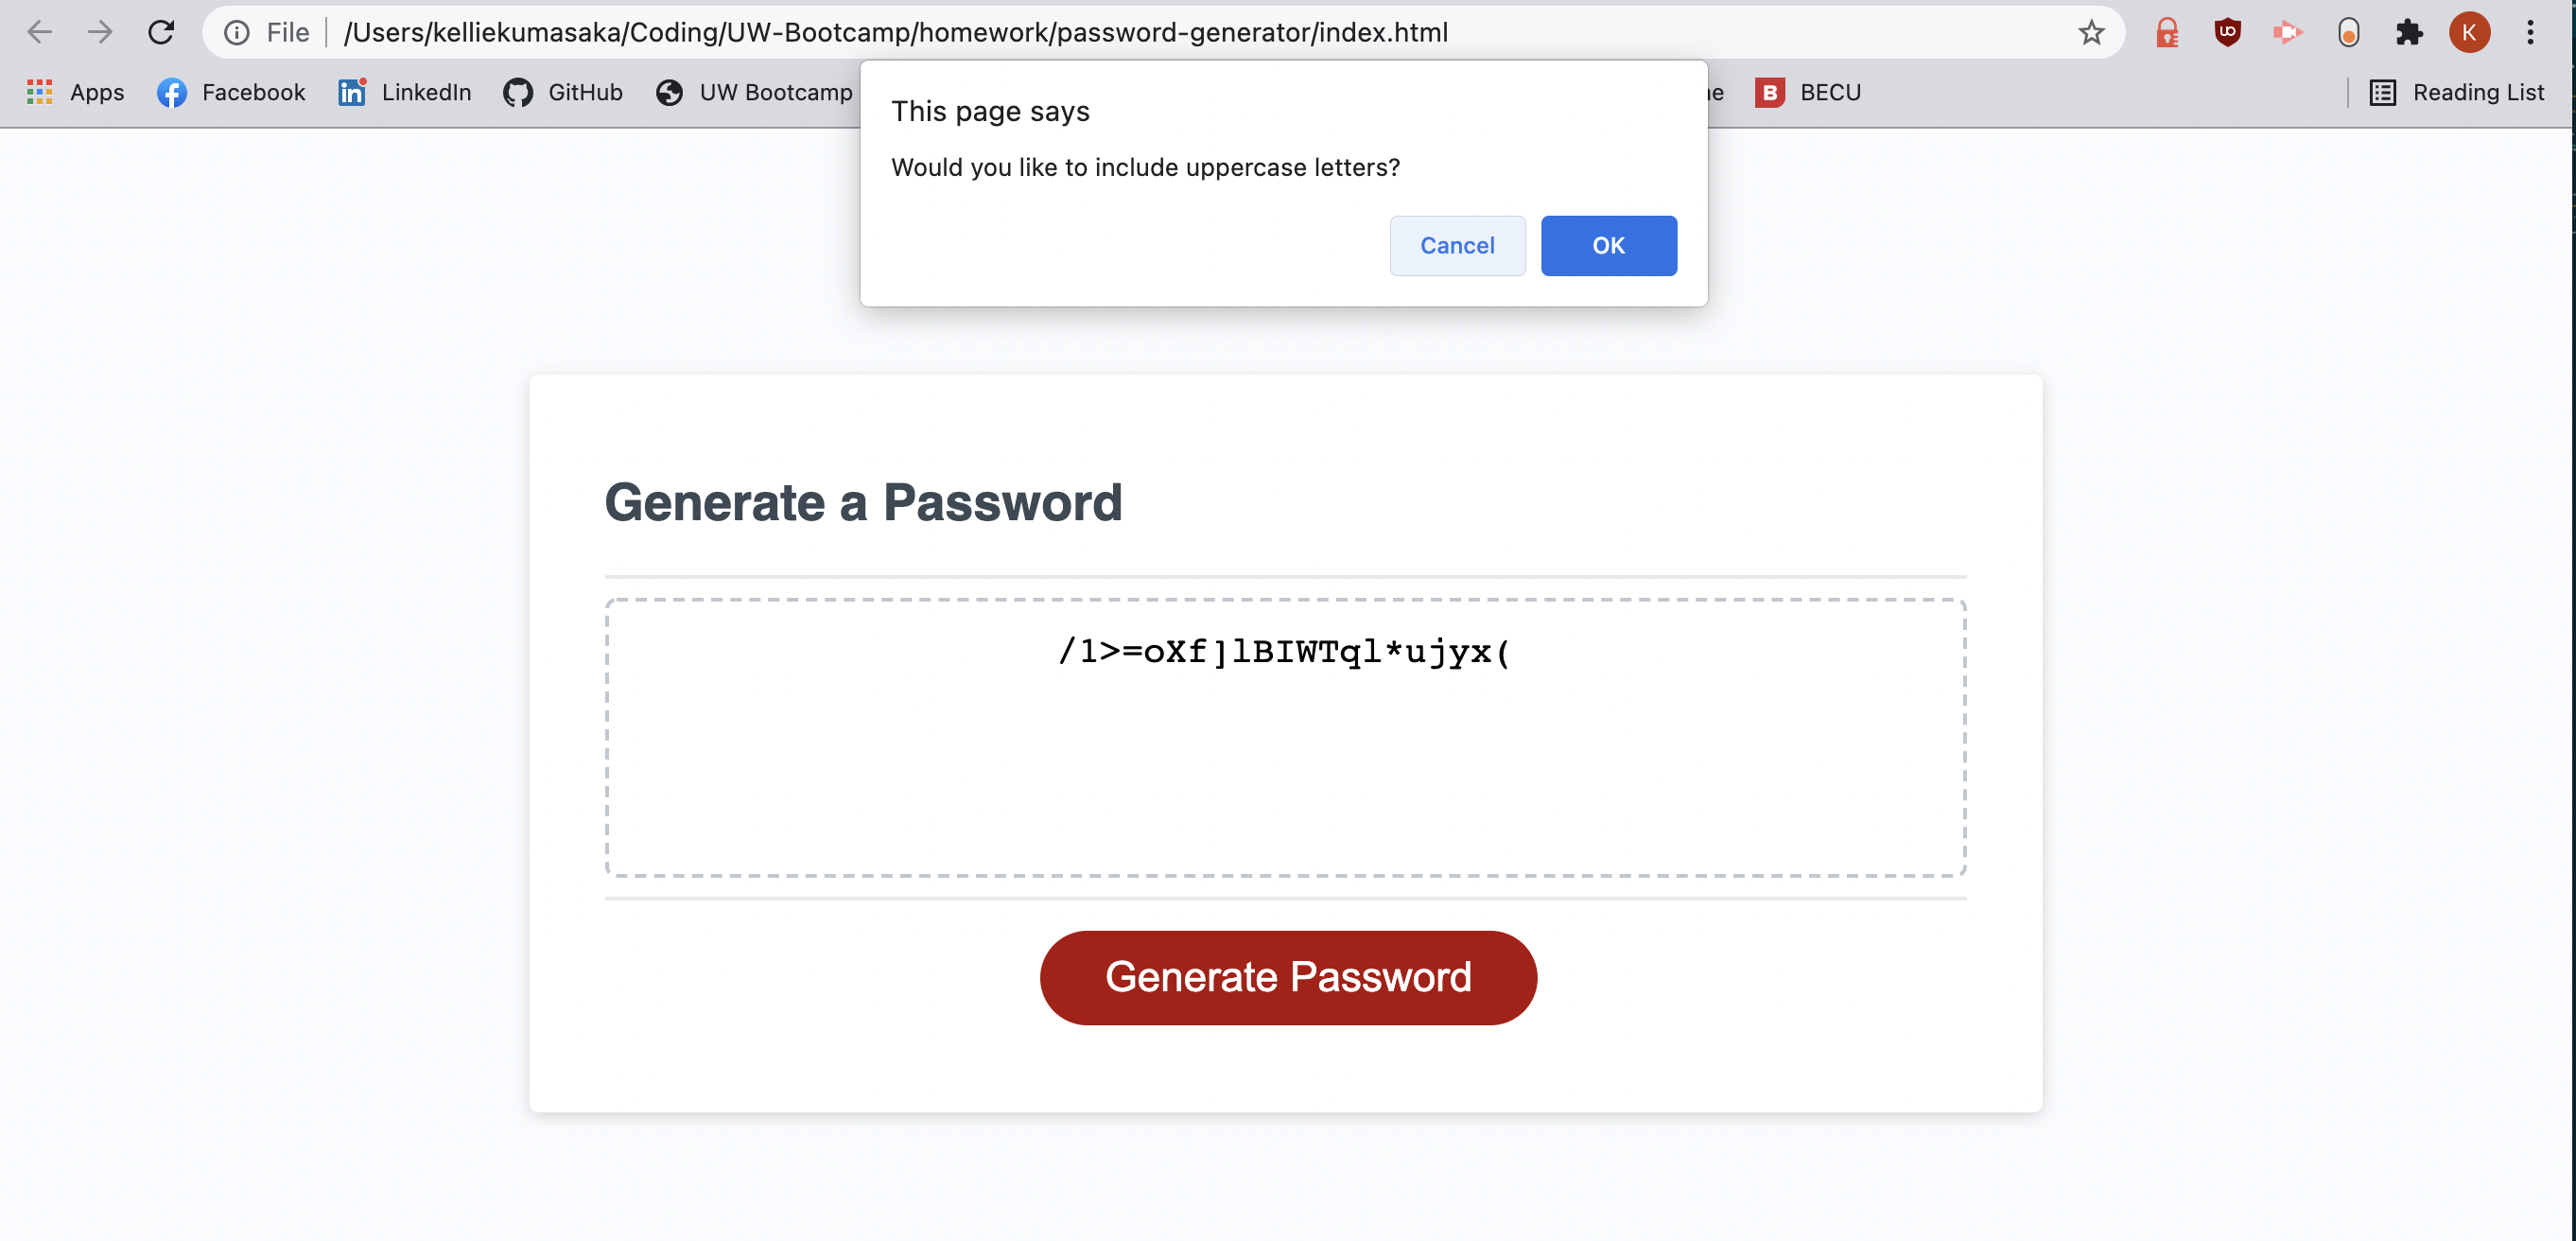 Password generator page with old password and pop up asking whether or not user wants uppercase letters